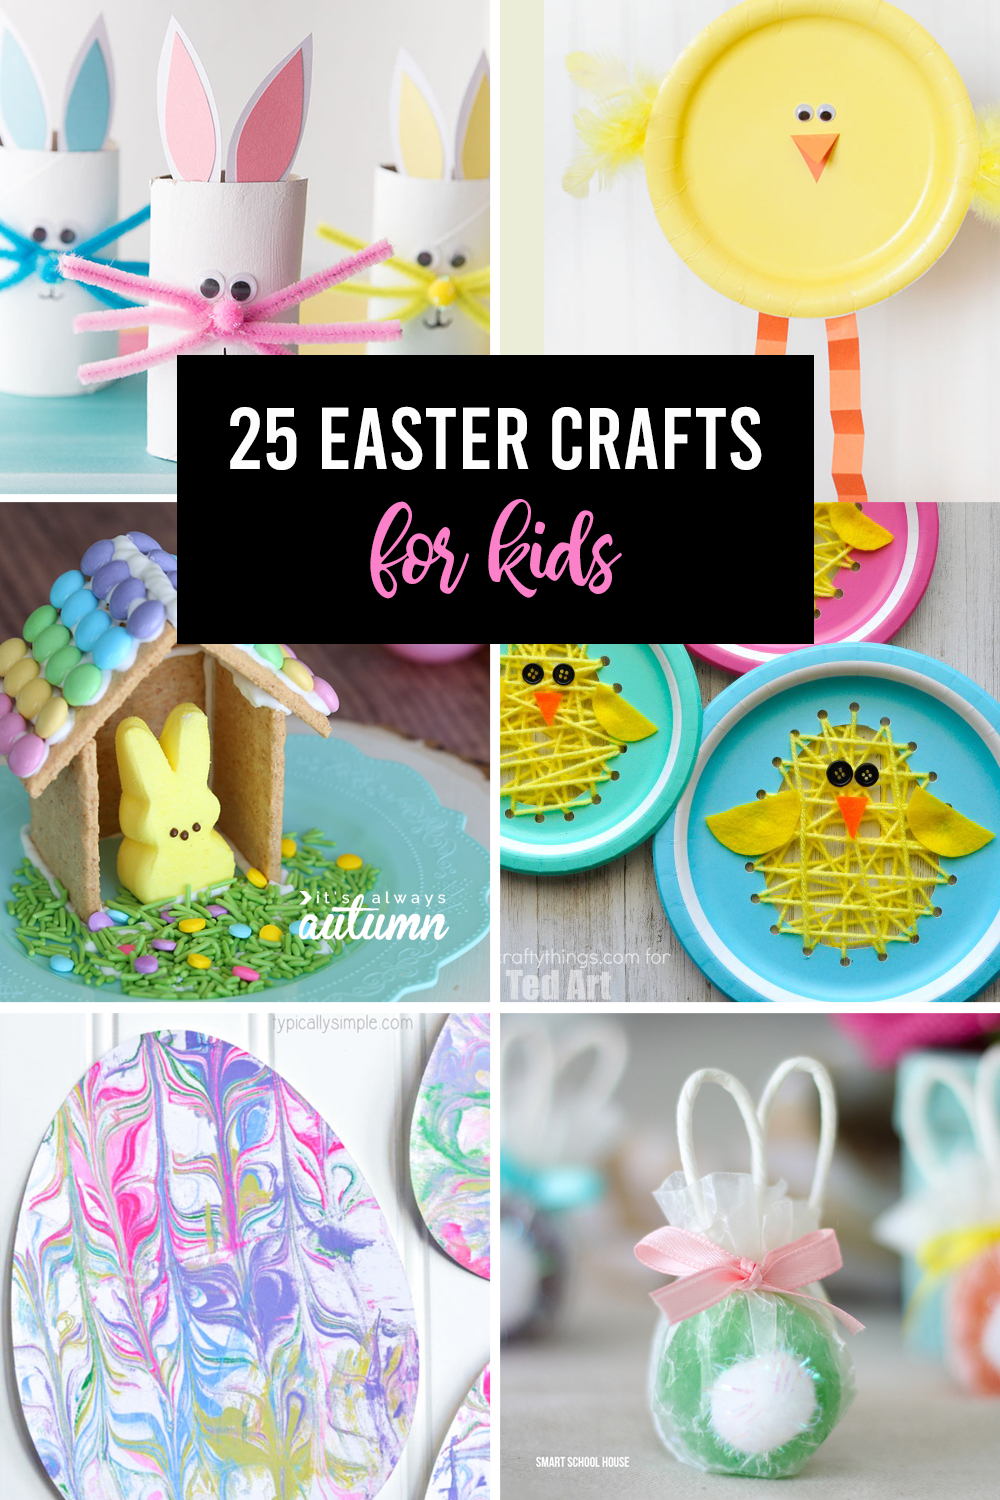 25 Creative No-Sew Crafts for Kids